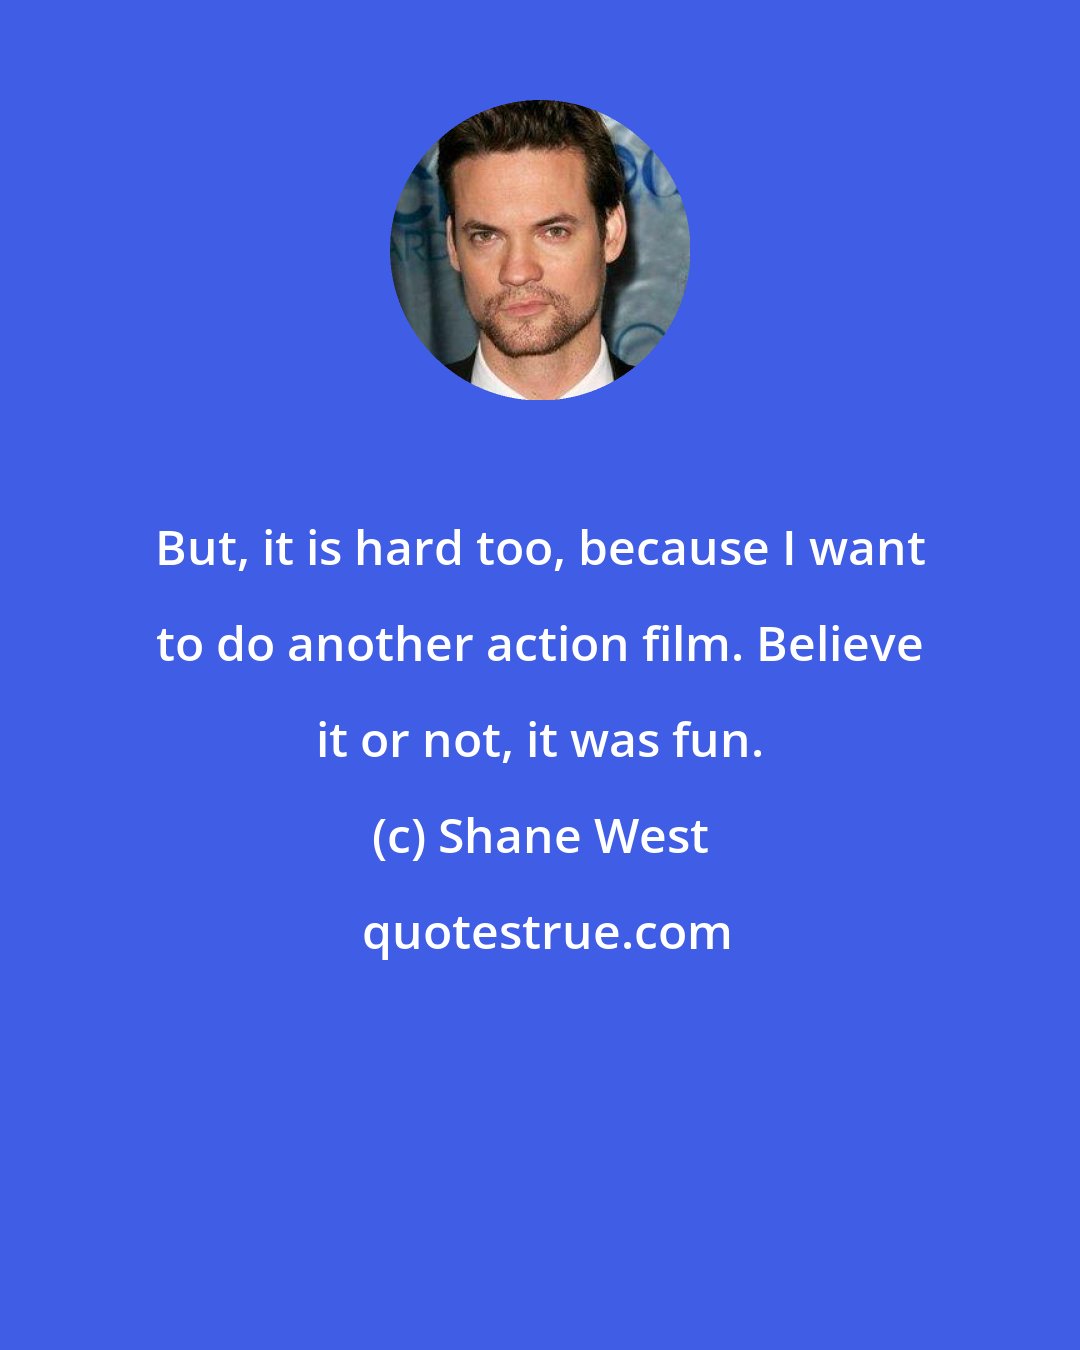 Shane West: But, it is hard too, because I want to do another action film. Believe it or not, it was fun.